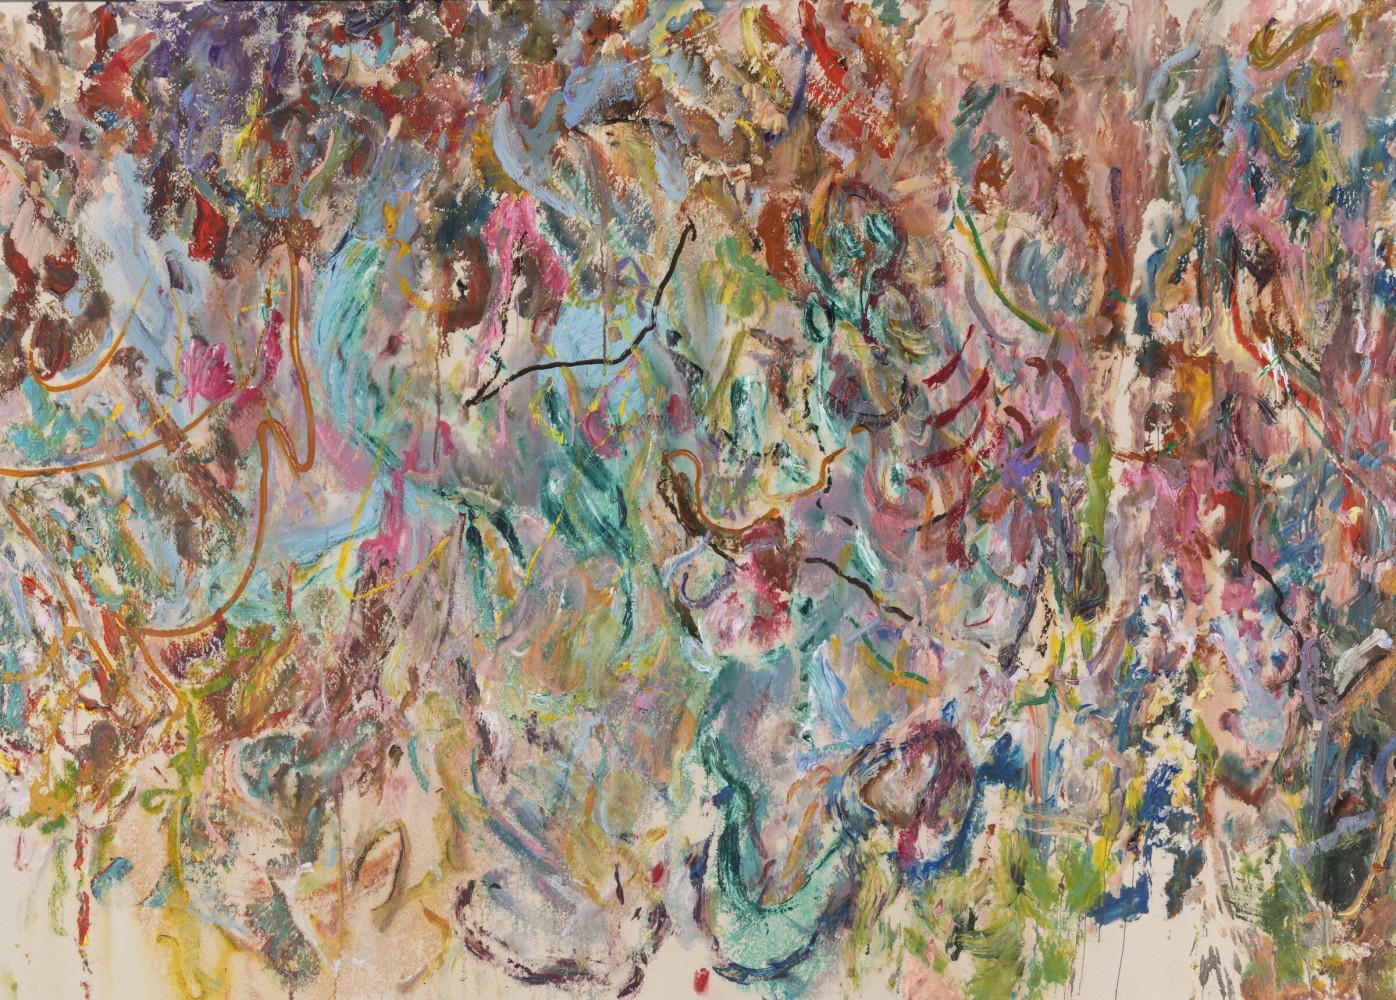 LARRY POONS (American b. 1937)

Secret Line

2022

Acrylic on canvas

67 1/8 x 94 3/4 inches

170.5 x 240.7cm